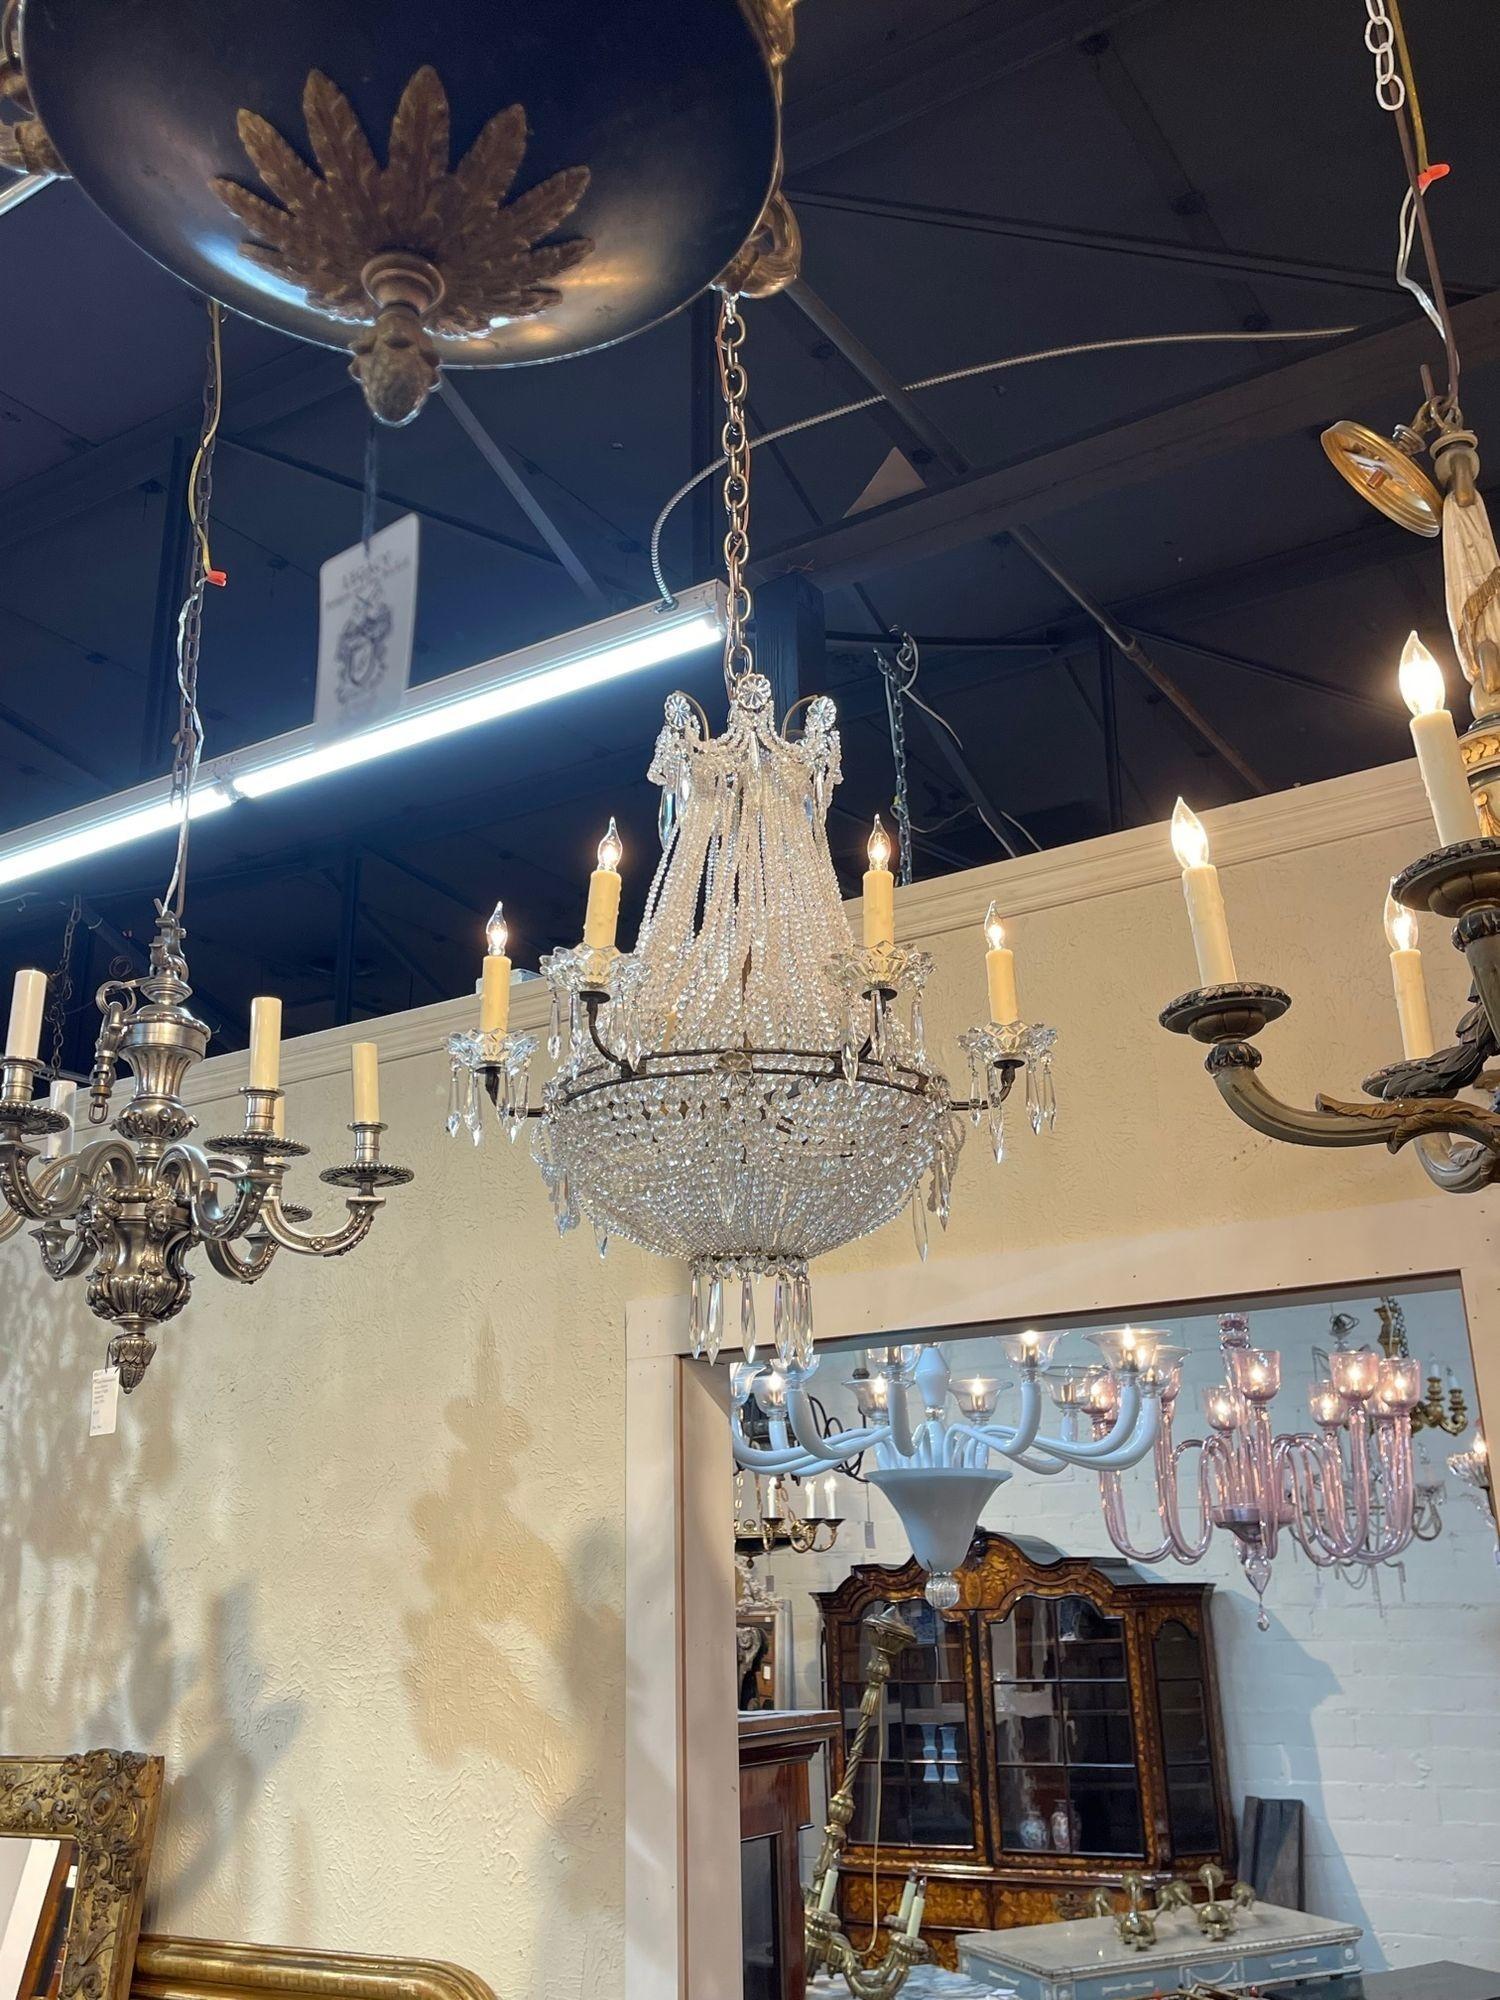 Vintage French beaded crystal 6-light basket form chandelier. Circa 1940. The chandelier has been professionally re-wired, cleaned and is ready to hang. Includes matching chain and canopy.